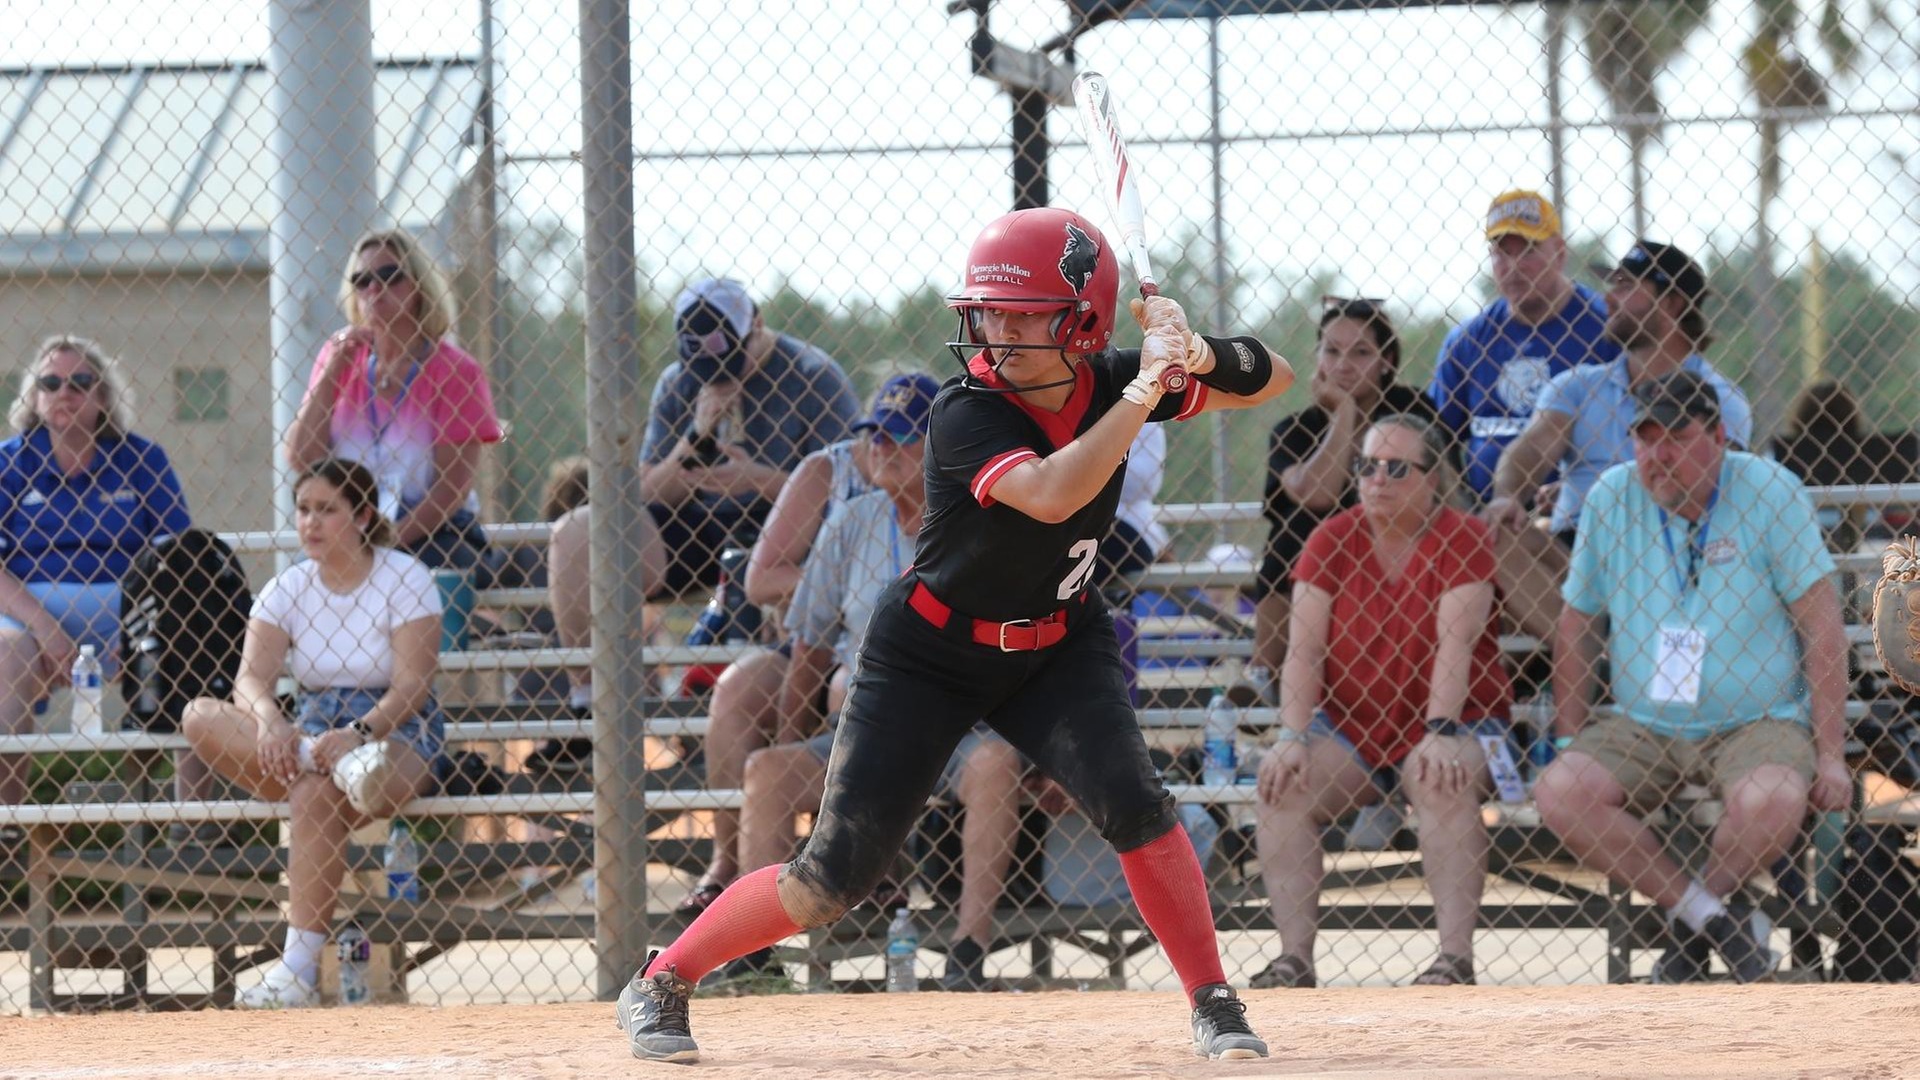 women's softball player wearing an all black uniform stands at the plate waiting for a pitch